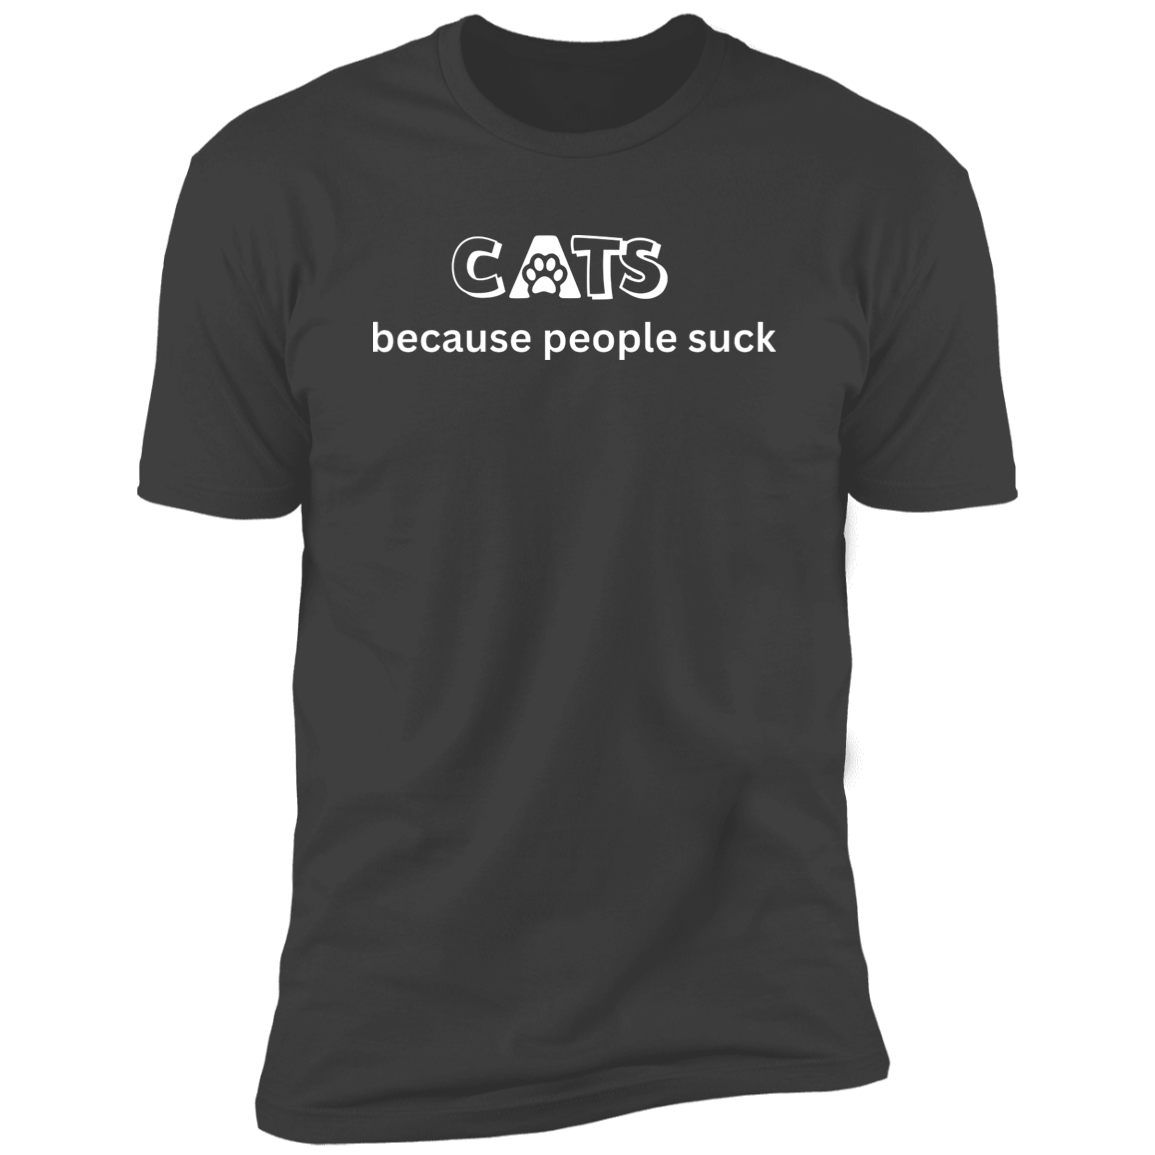 Cats Because People Suck T-shirt, Cat Shirt for humans, in heavy metal gray